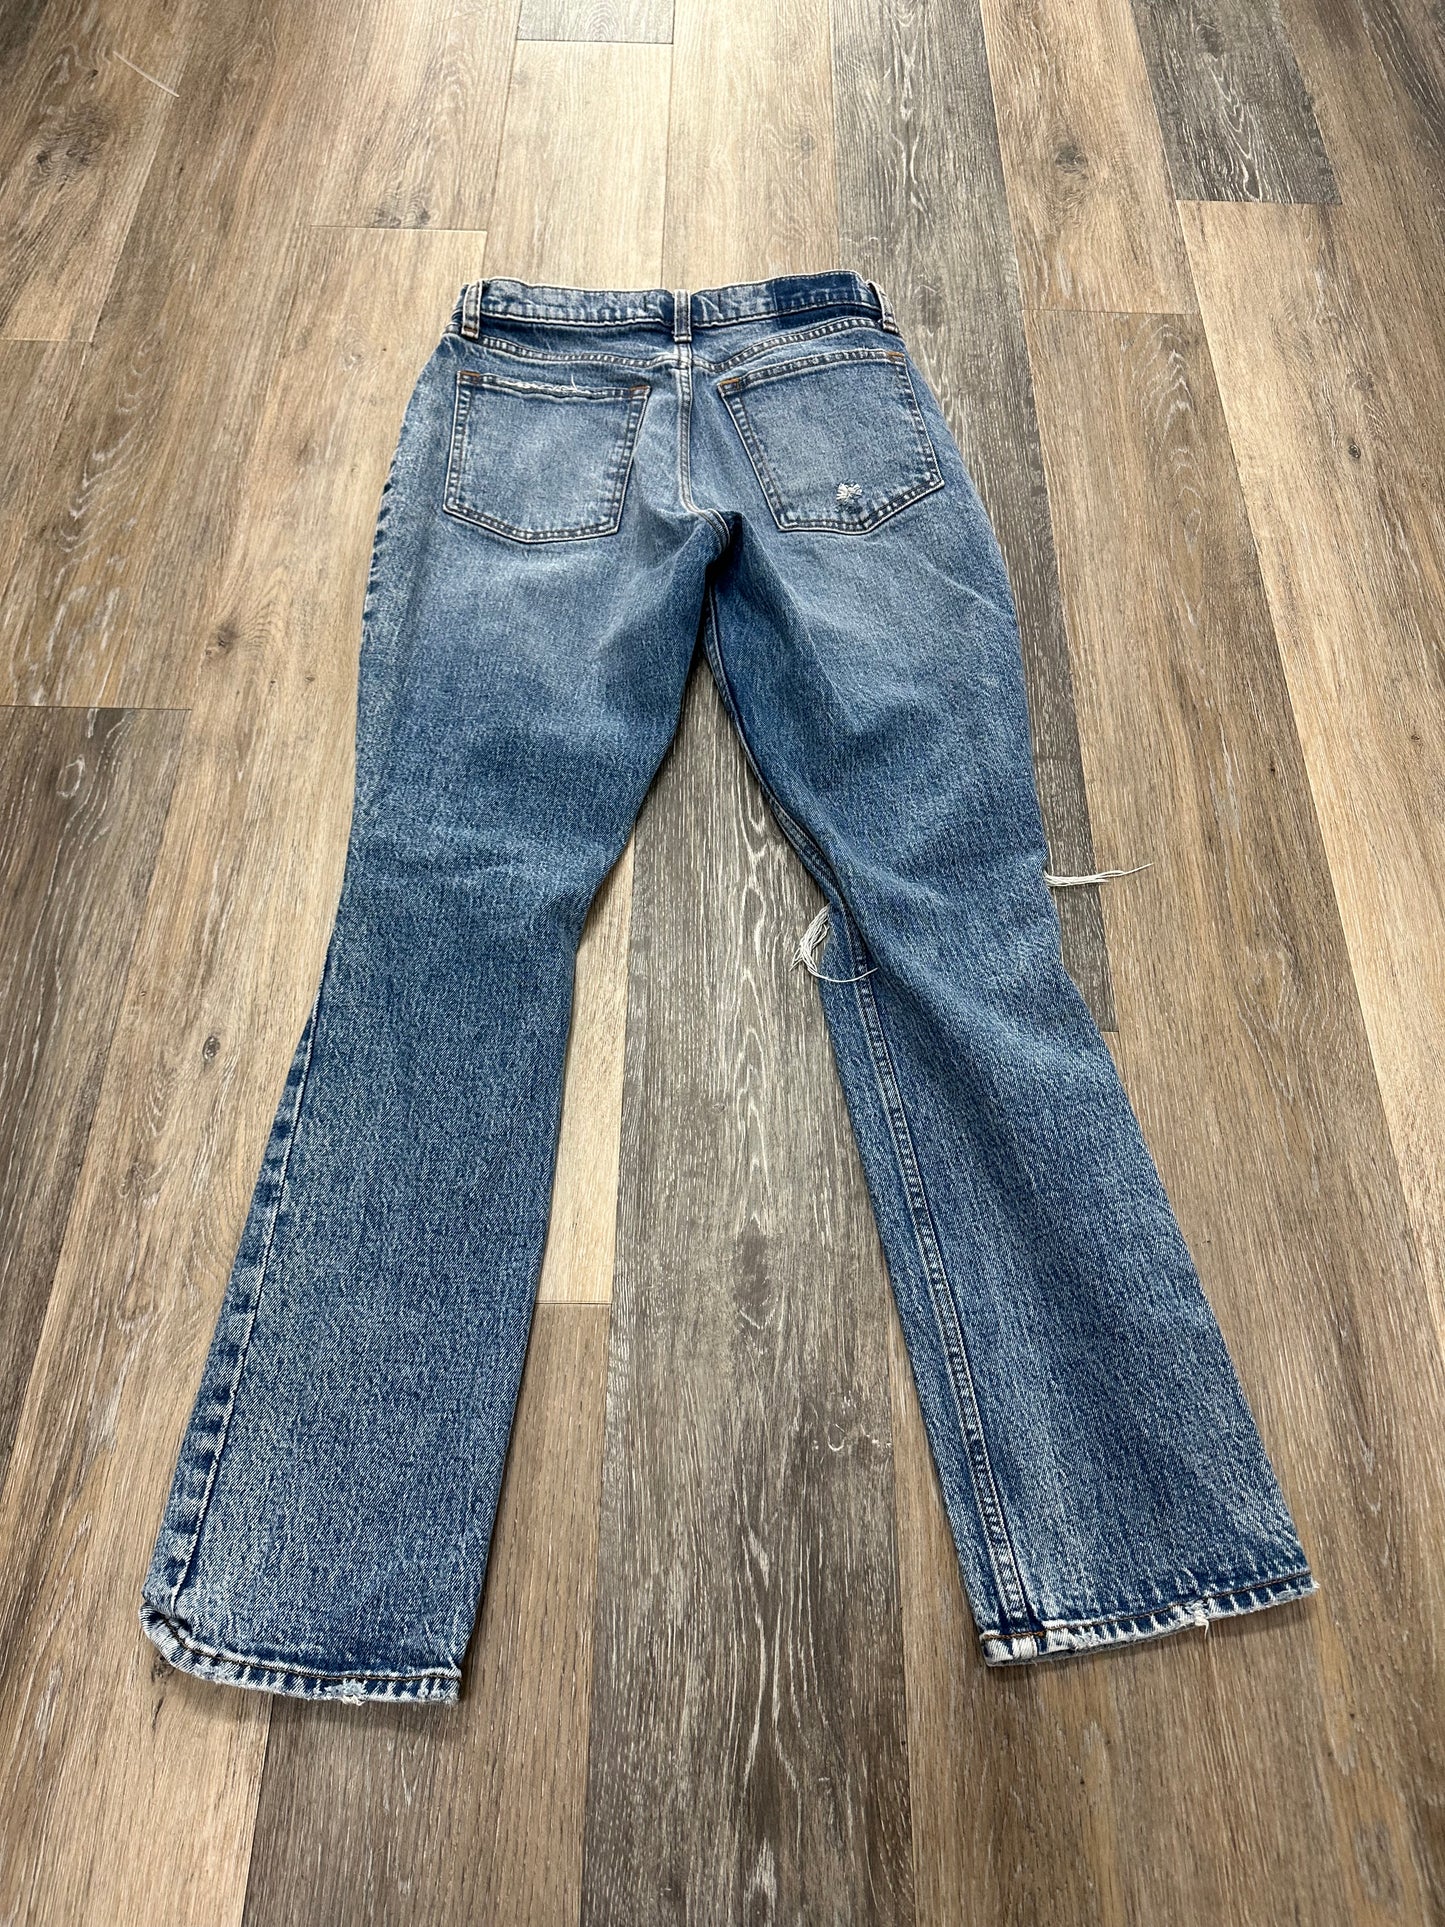 Jeans Skinny By Abercrombie And Fitch  Size: 6